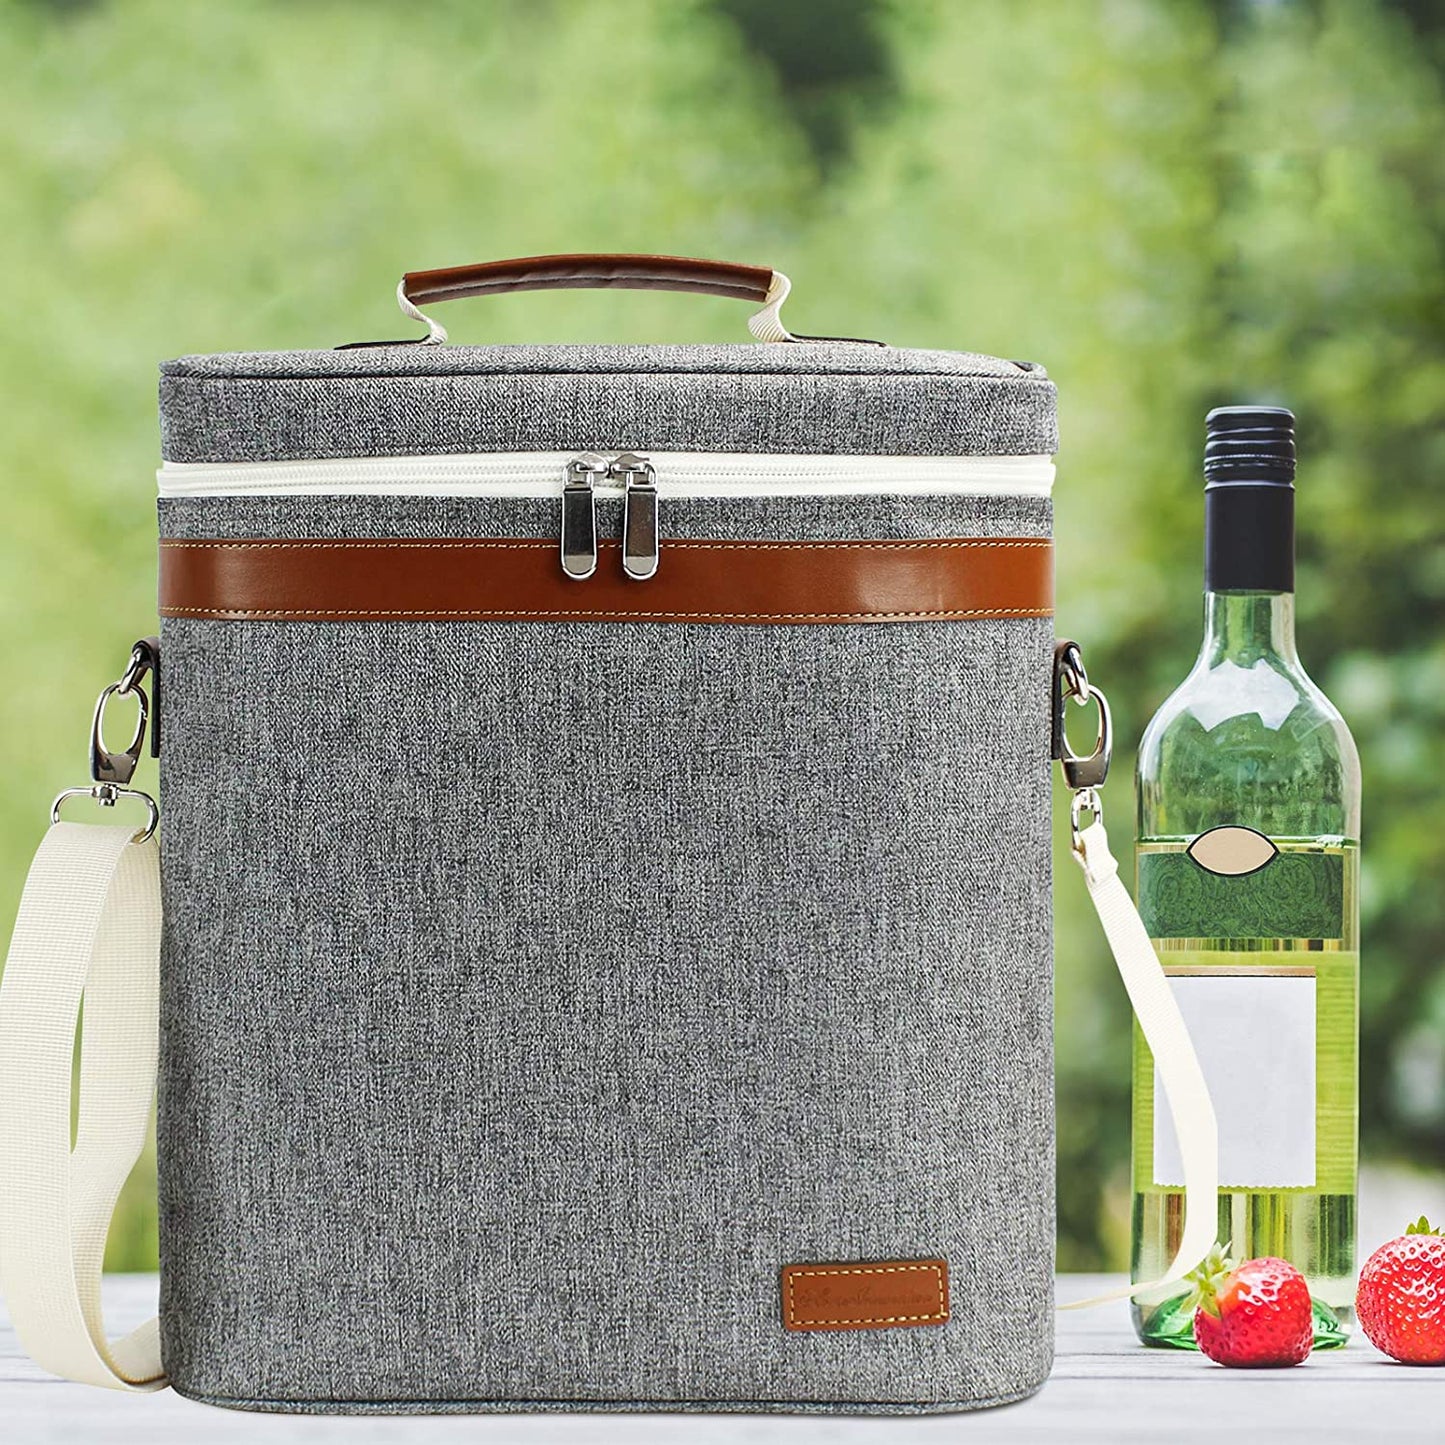 3 Bottle Insulated Wine Tote Cooler Bag, Portable Wine Carrier with Corkscrew Opener and Shoulder Strap for Beach Travel Picnic, Unique Wine Carrier for Wine Lover Gifts Grey